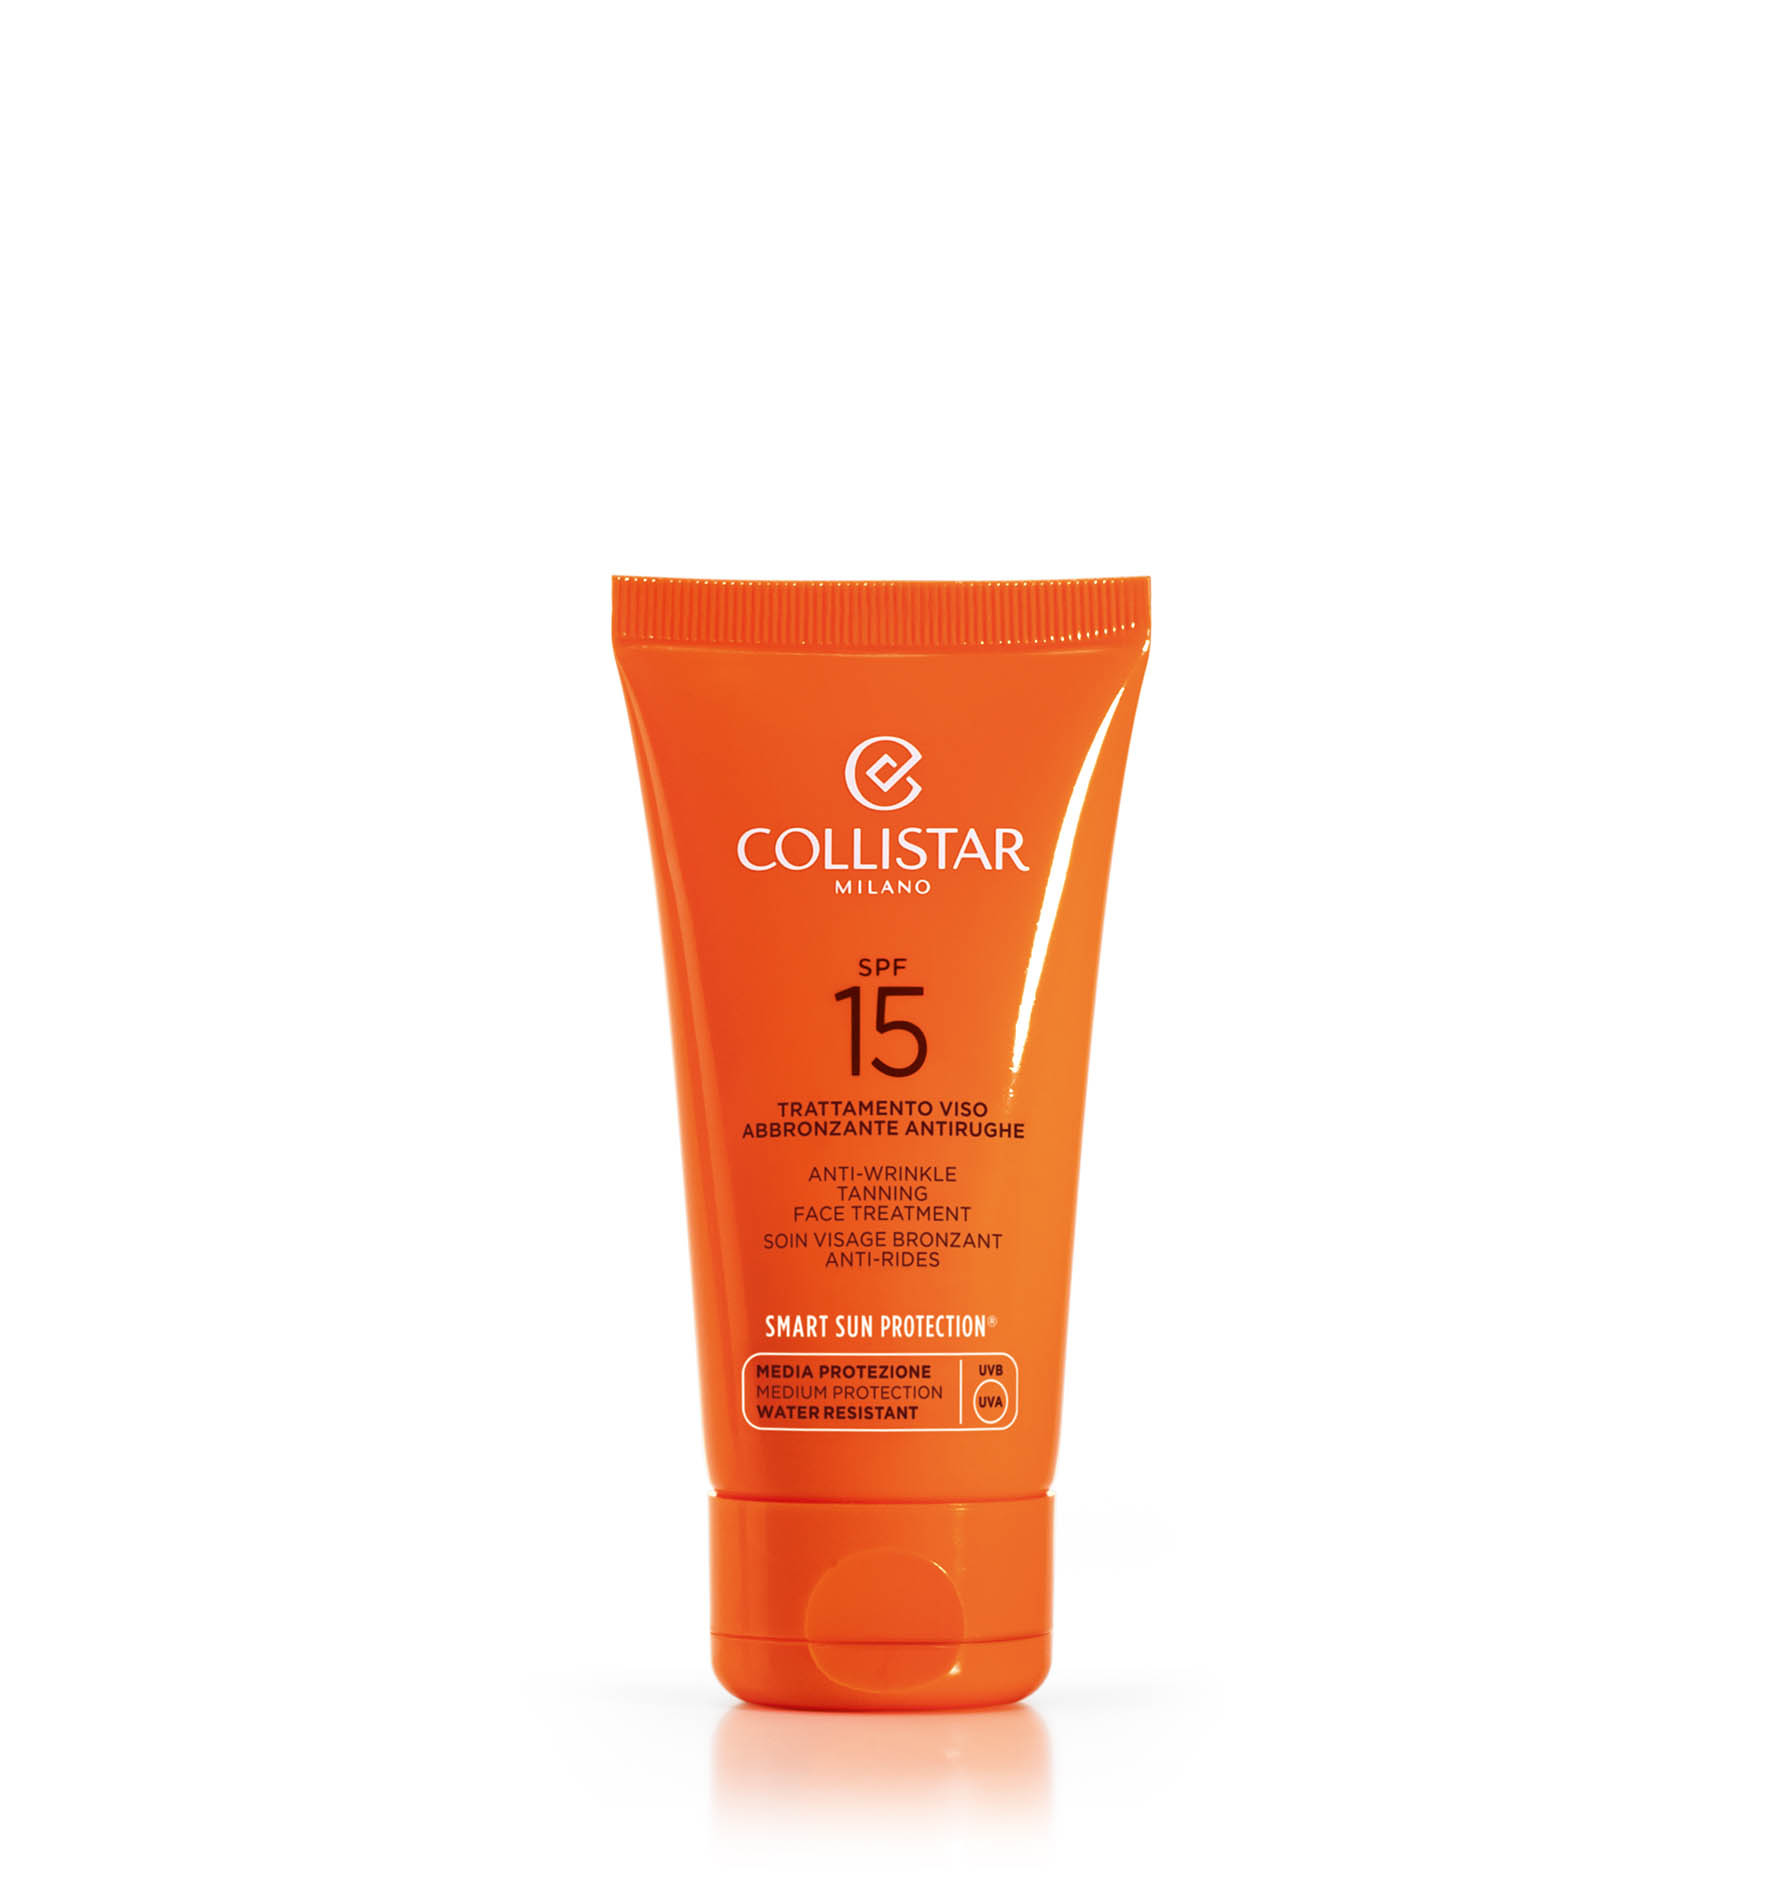 ANTIWRINKLE TANNING FACE TREATMENT SPF 15 | Collistar - Shop Online Ufficiale